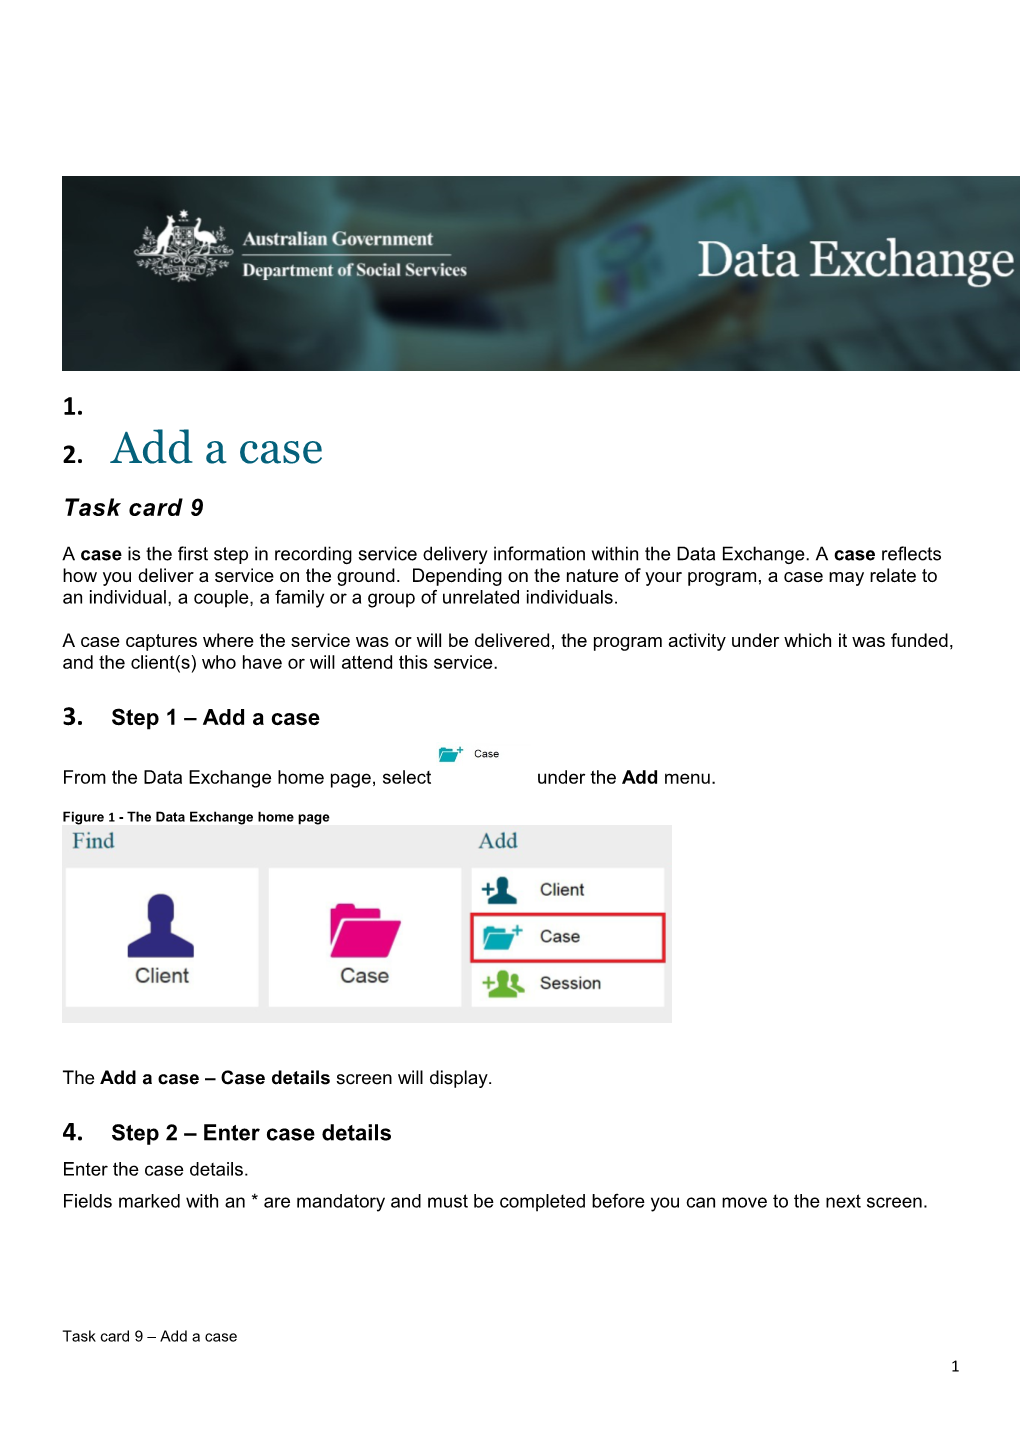 Figure 1 - the Data Exchange Home Page